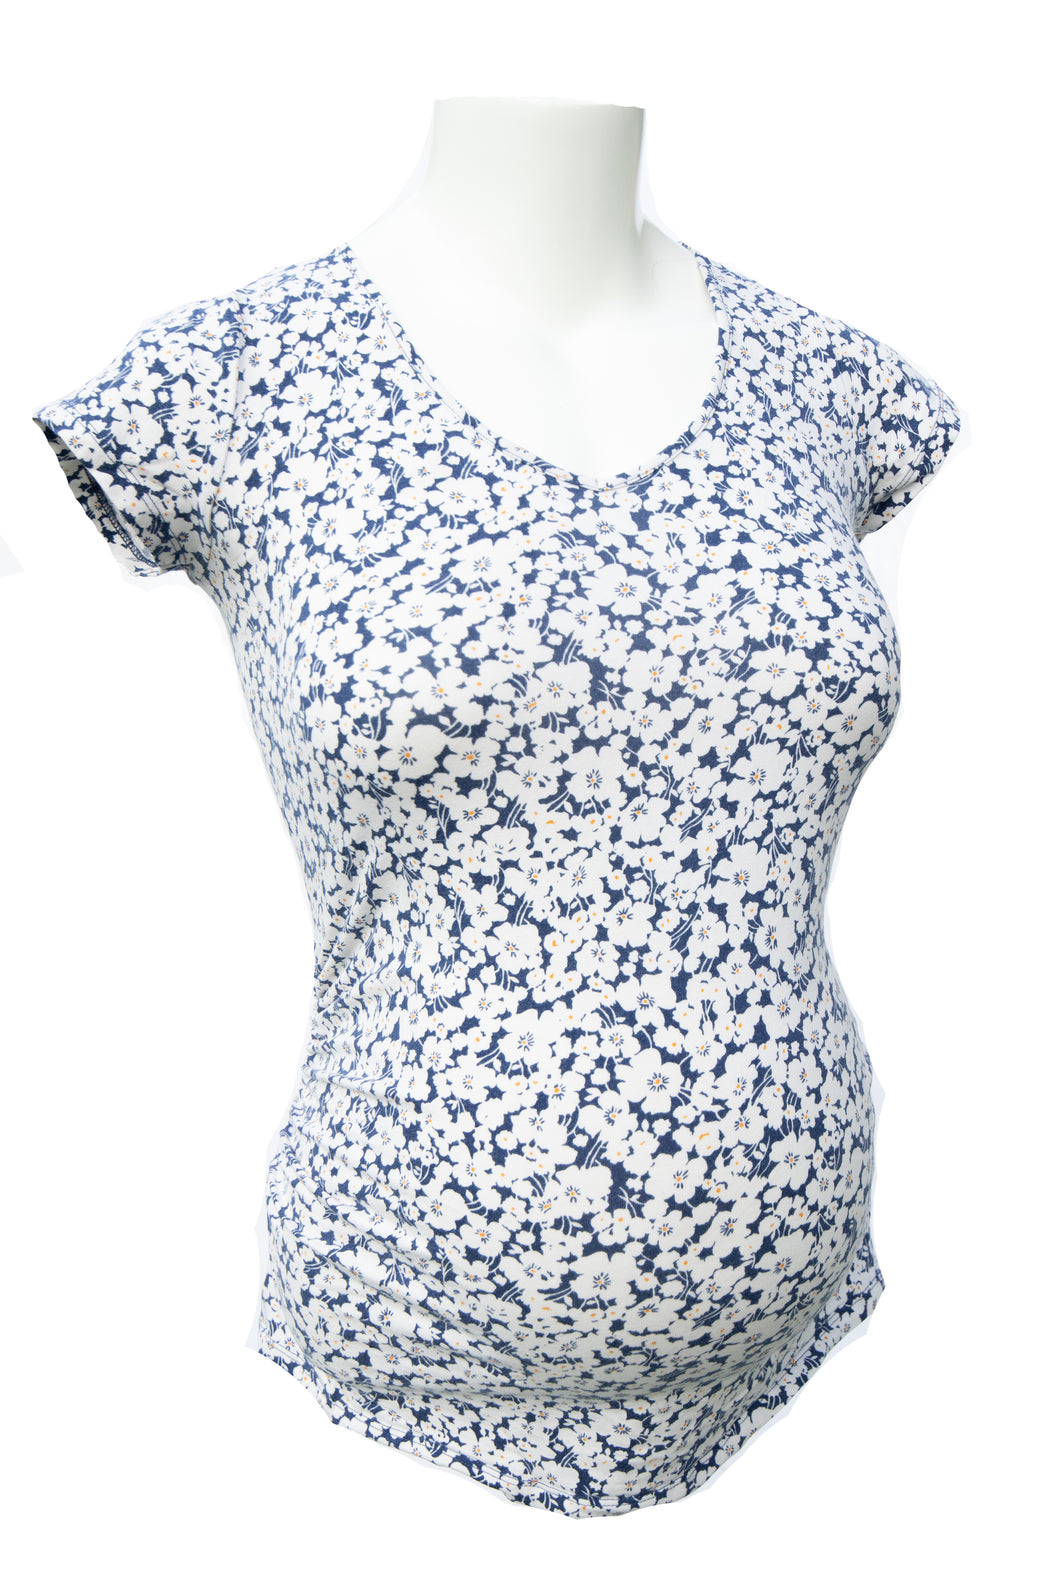 XS Old Navy Fitted Maternity T-shirt in a Floral Print